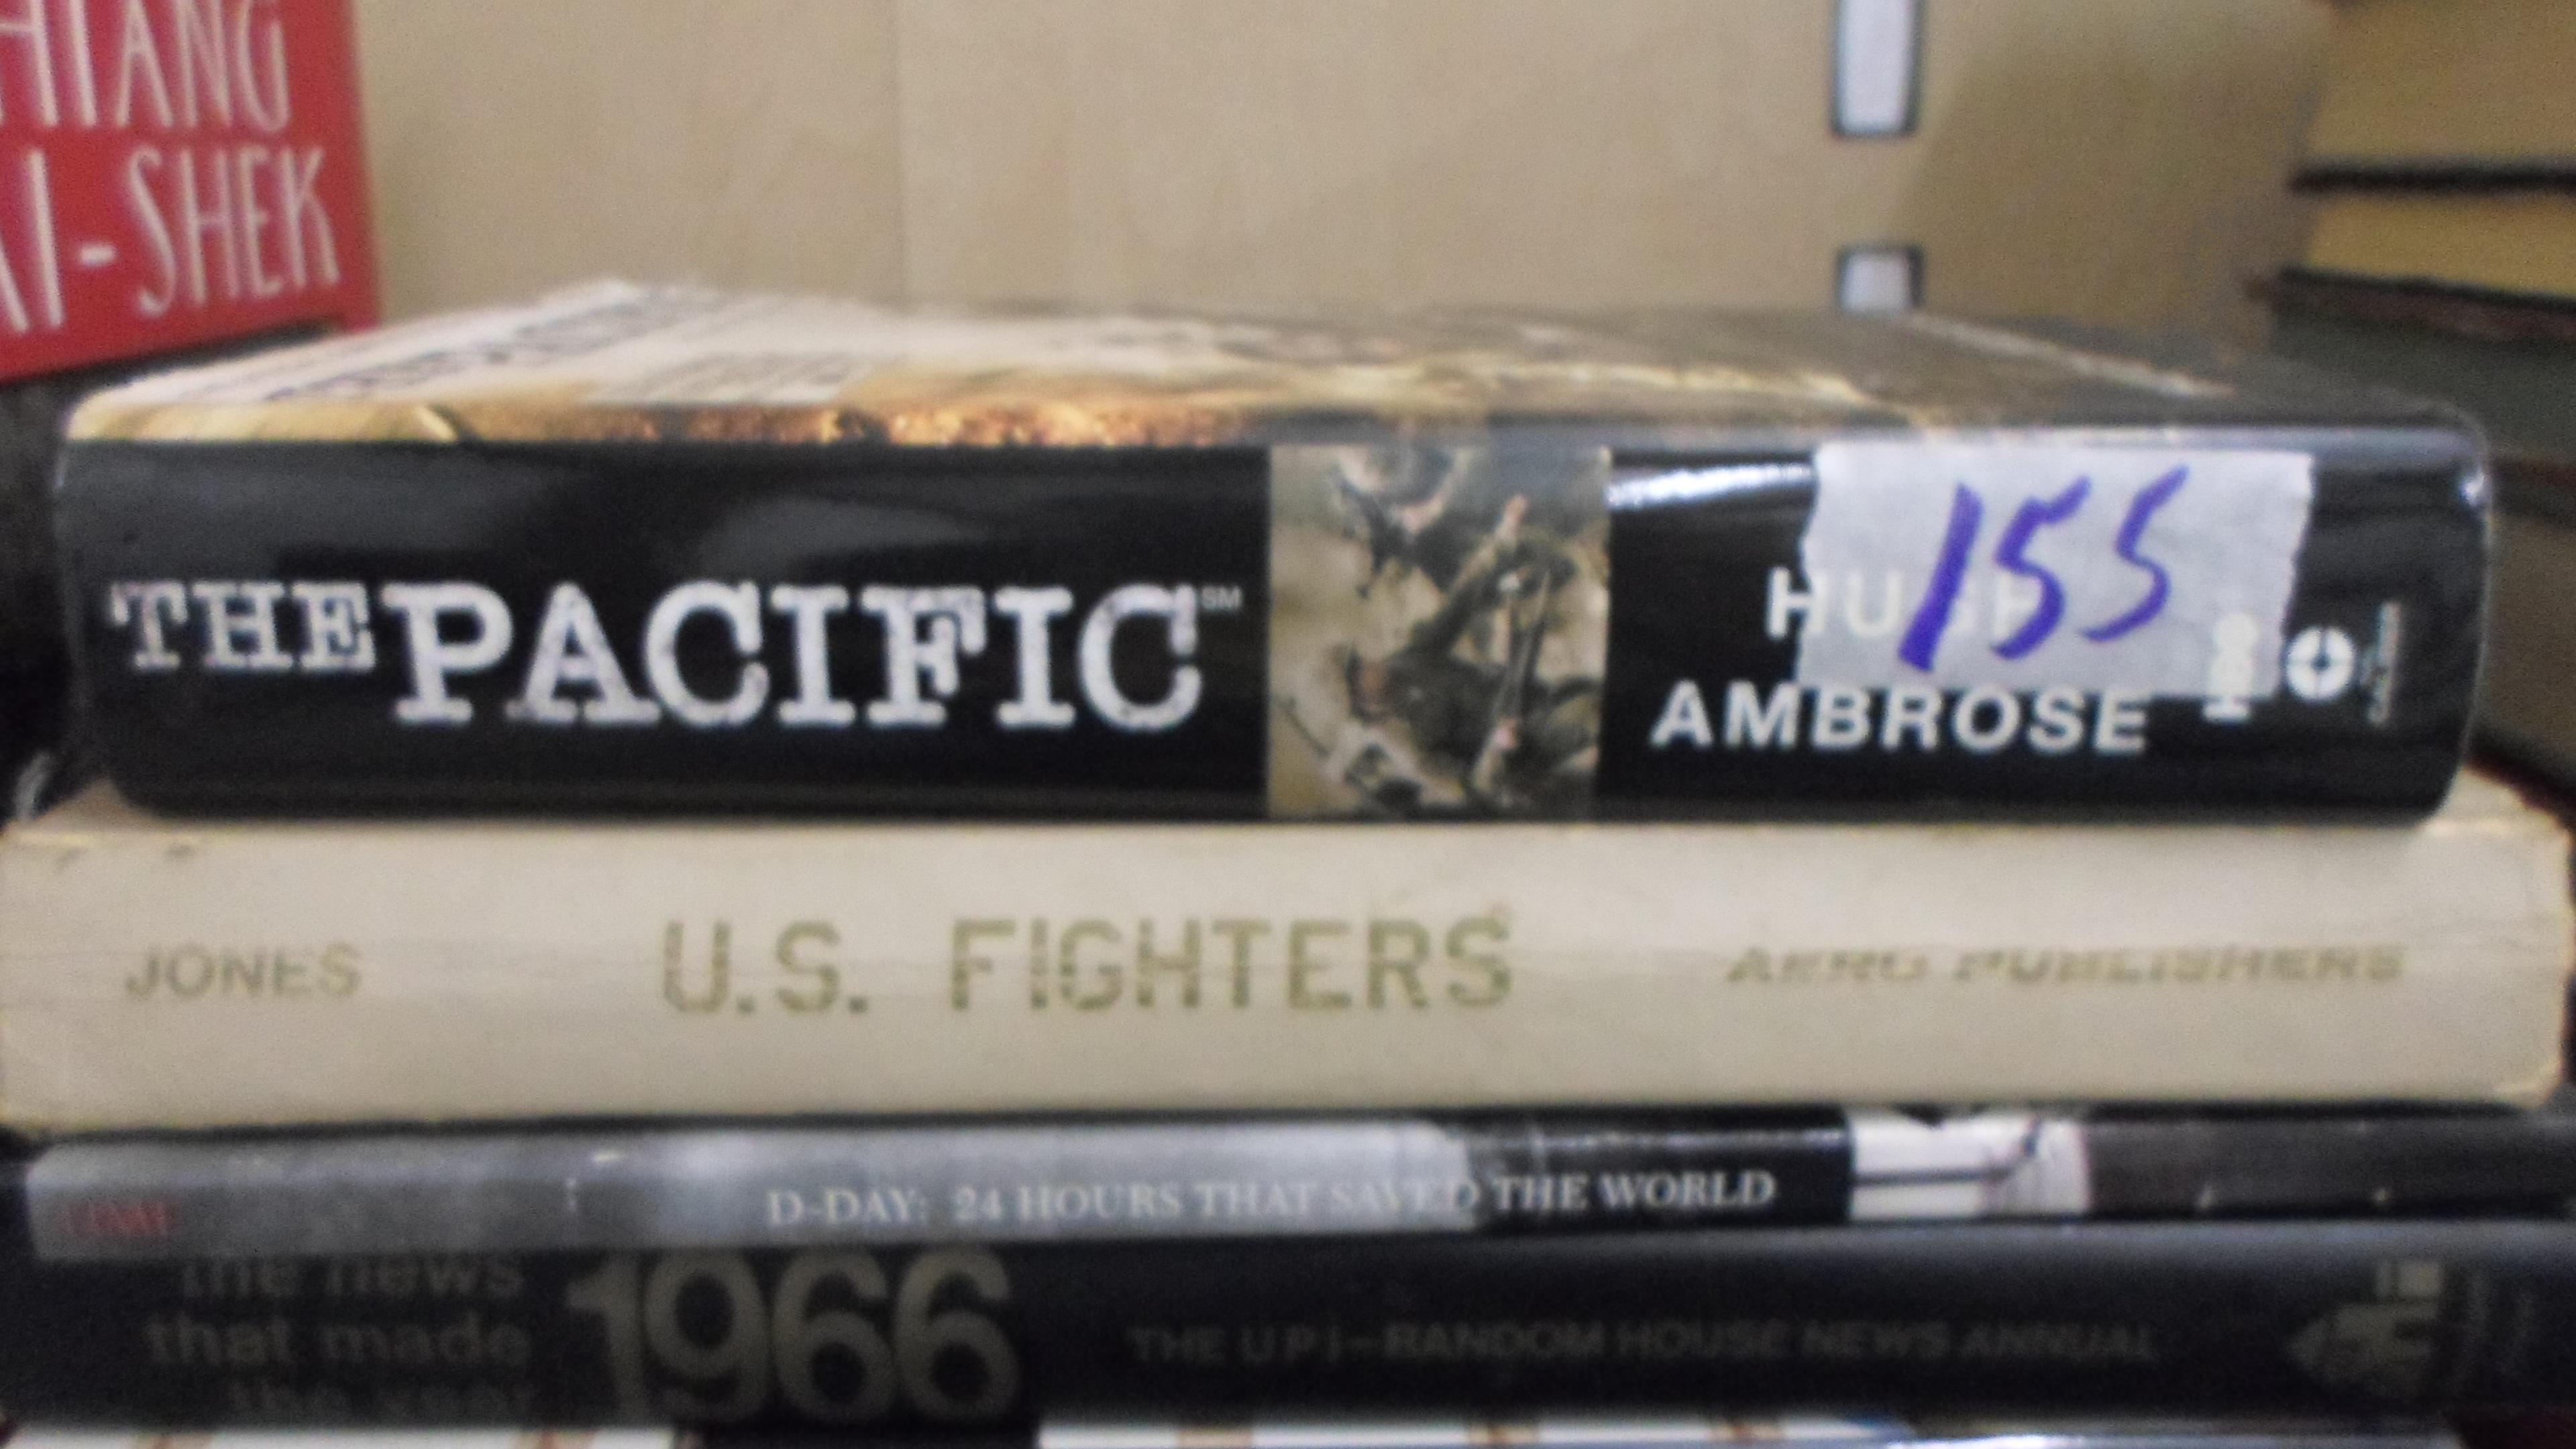 history books, 6 history and war books